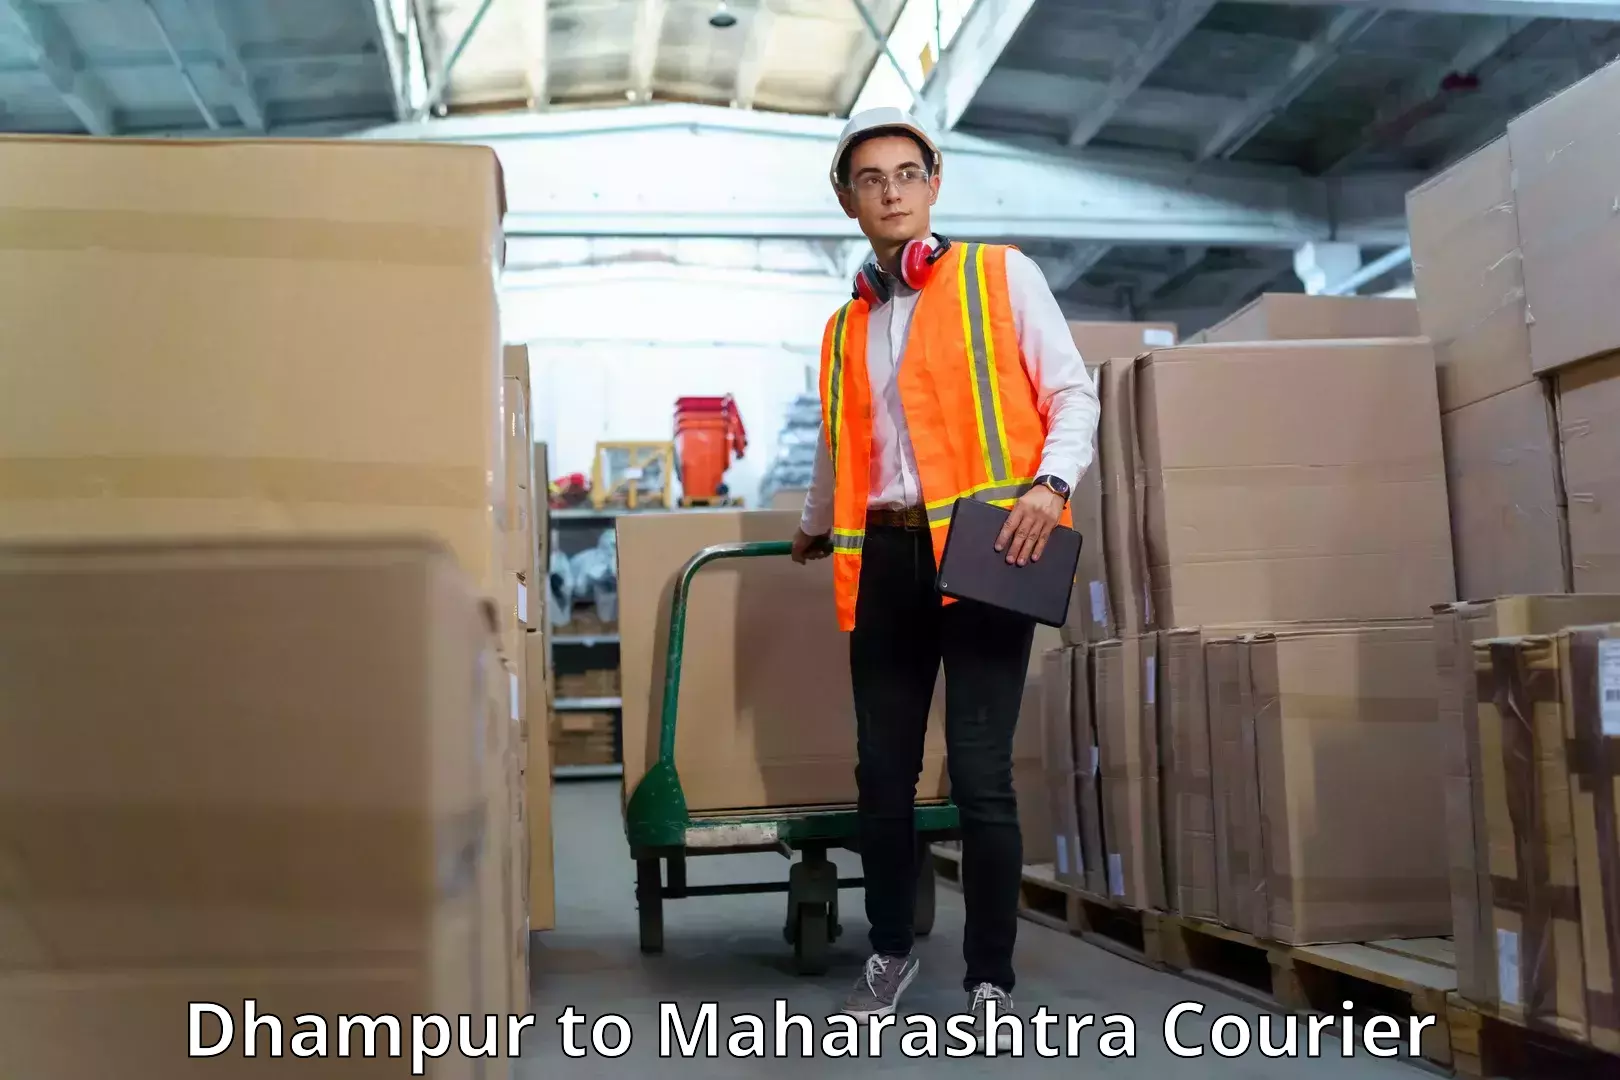 Express delivery network Dhampur to Maharashtra